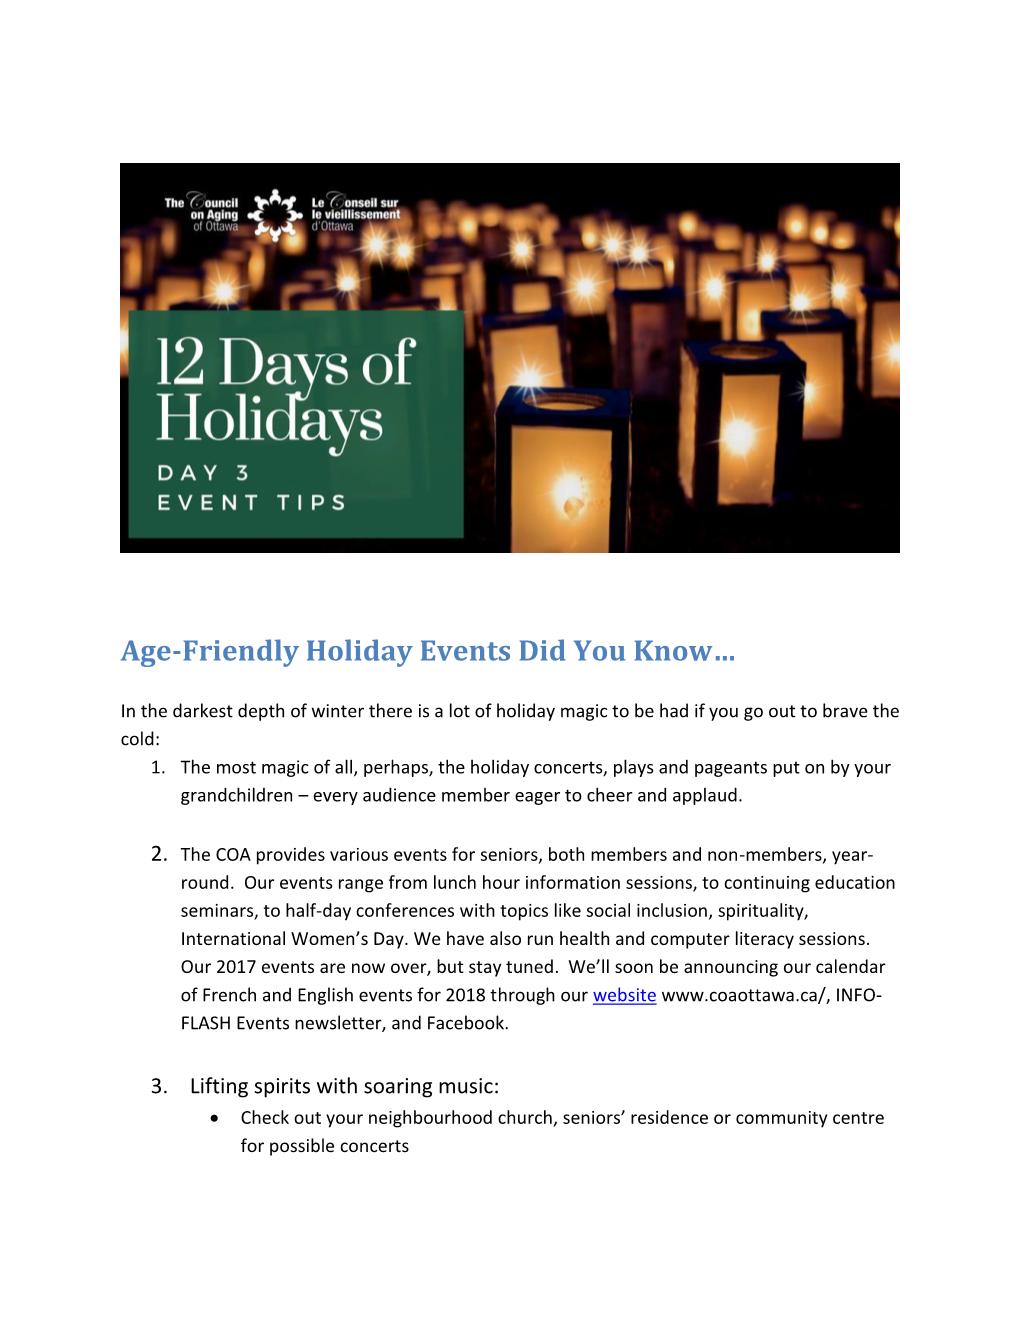 Age-Friendly Holiday Events Did You Know…